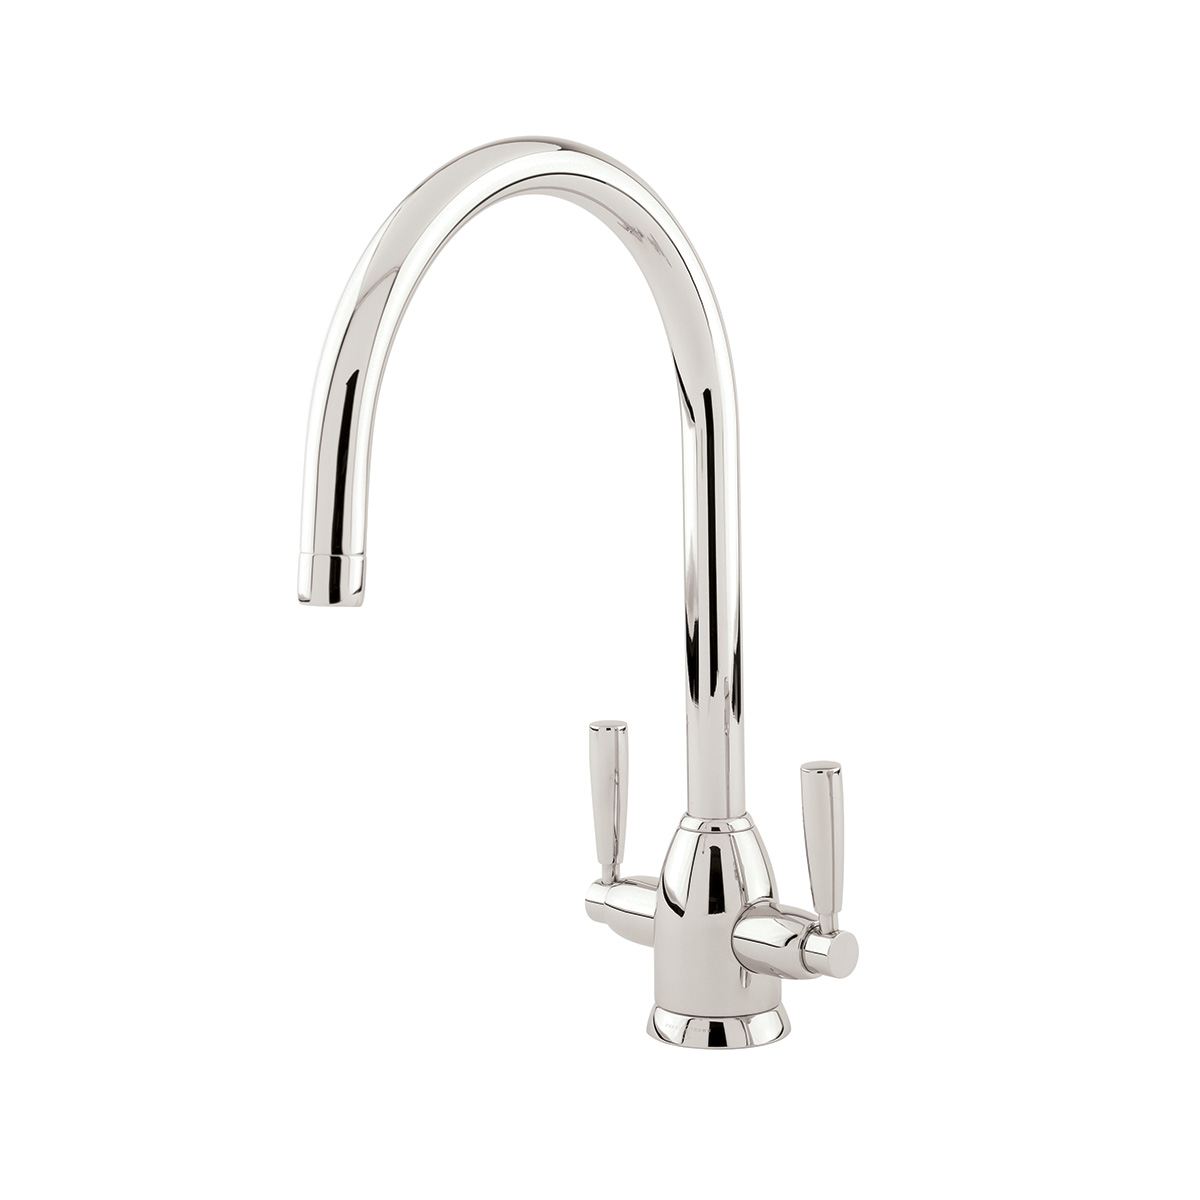 Shaws by Perrin & Rowe Silverdale kitchen mixer in Nickel. Oberon style kitchen mixer AUSH.4861. Distributed in Australia by Luxe by Design, Brisbane.